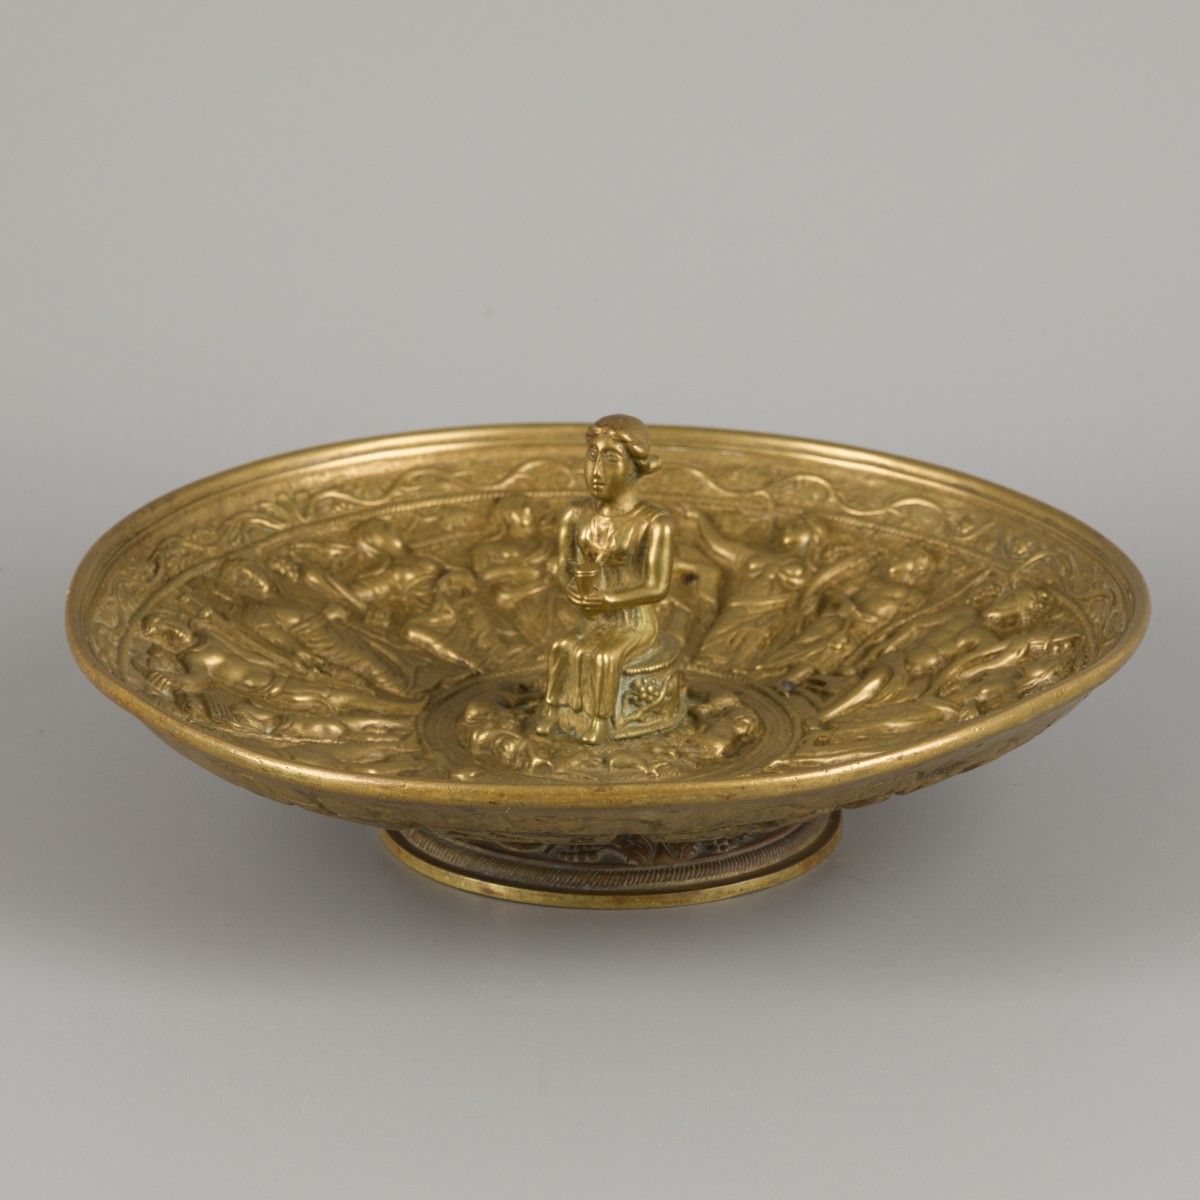 A bronze tazza with decor in high relief, France(?), ca. 1900. Une figure centra&hellip;